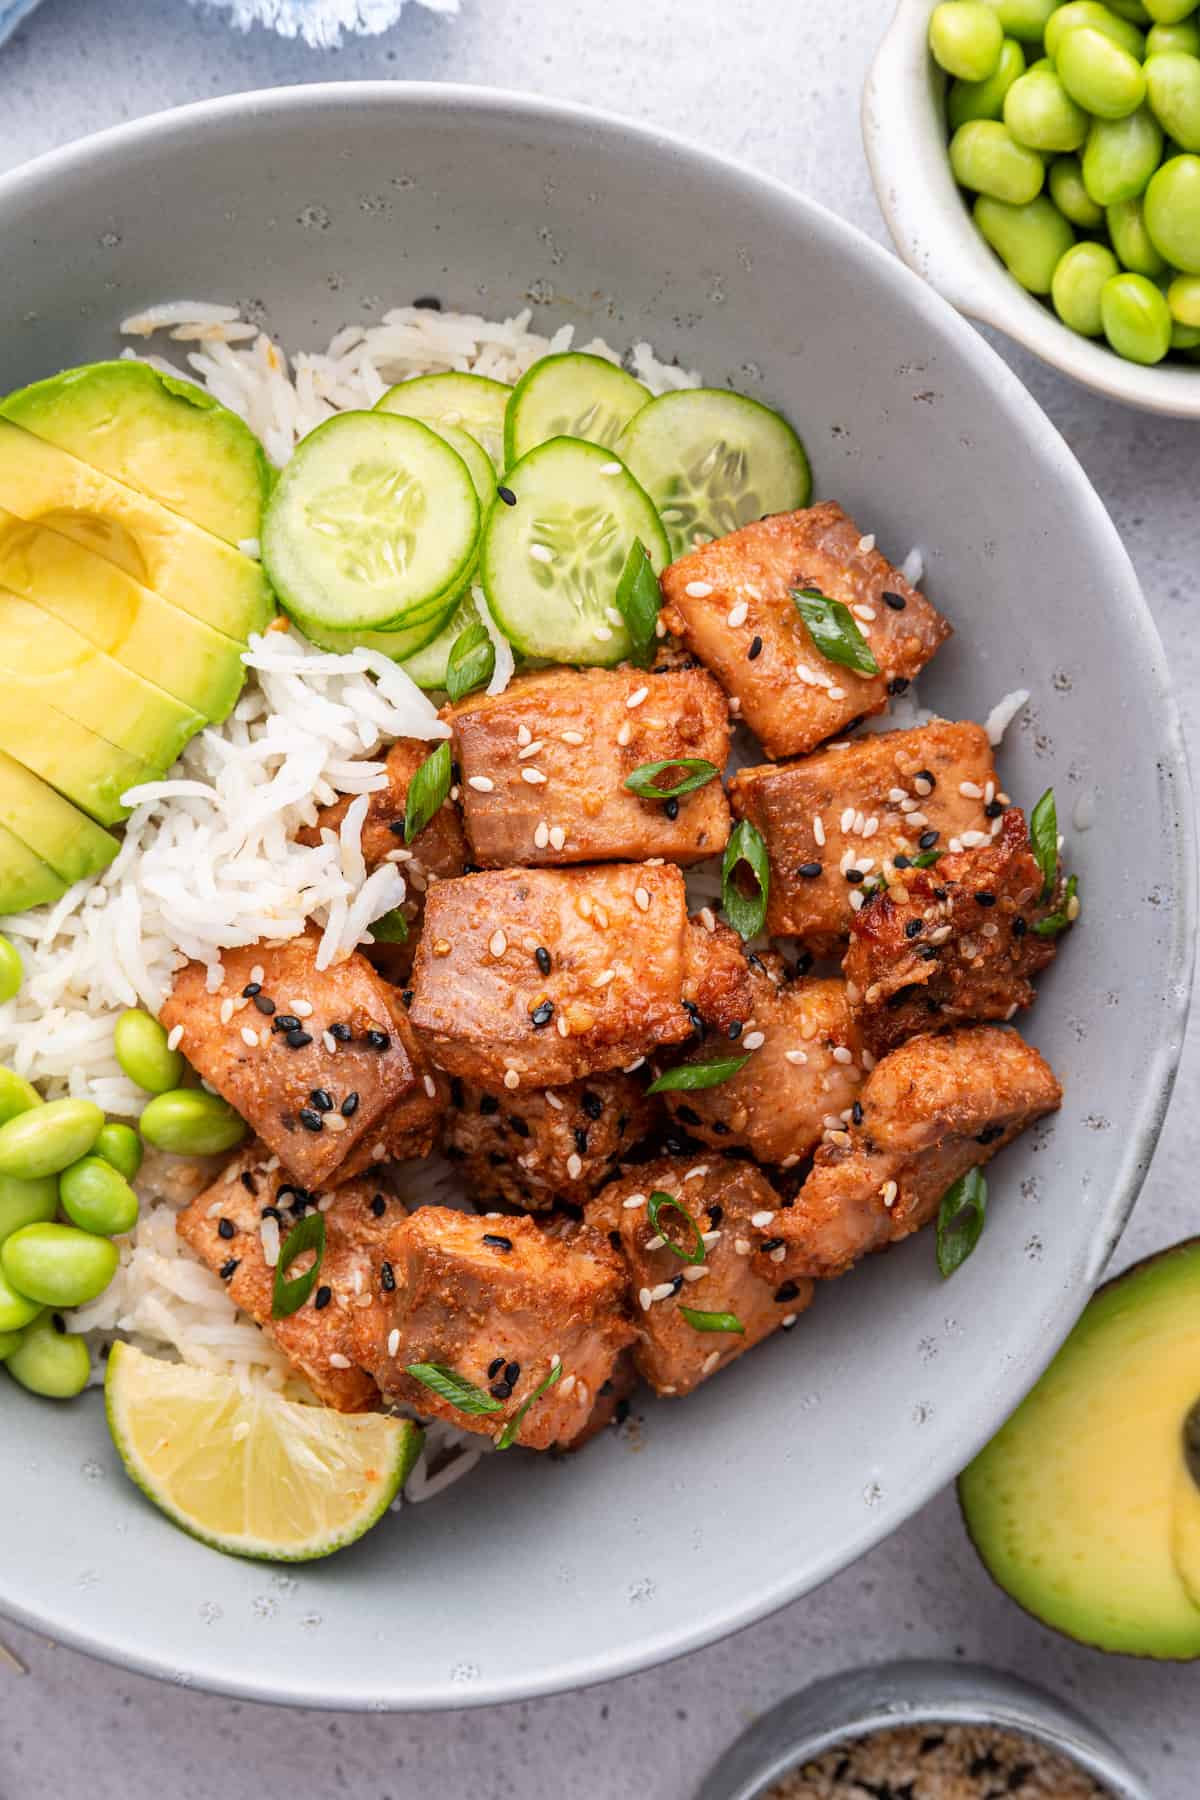 Overhead view of air fryer salmon bites in bowl with rice, cucumbers, edamame, avocado, and lime